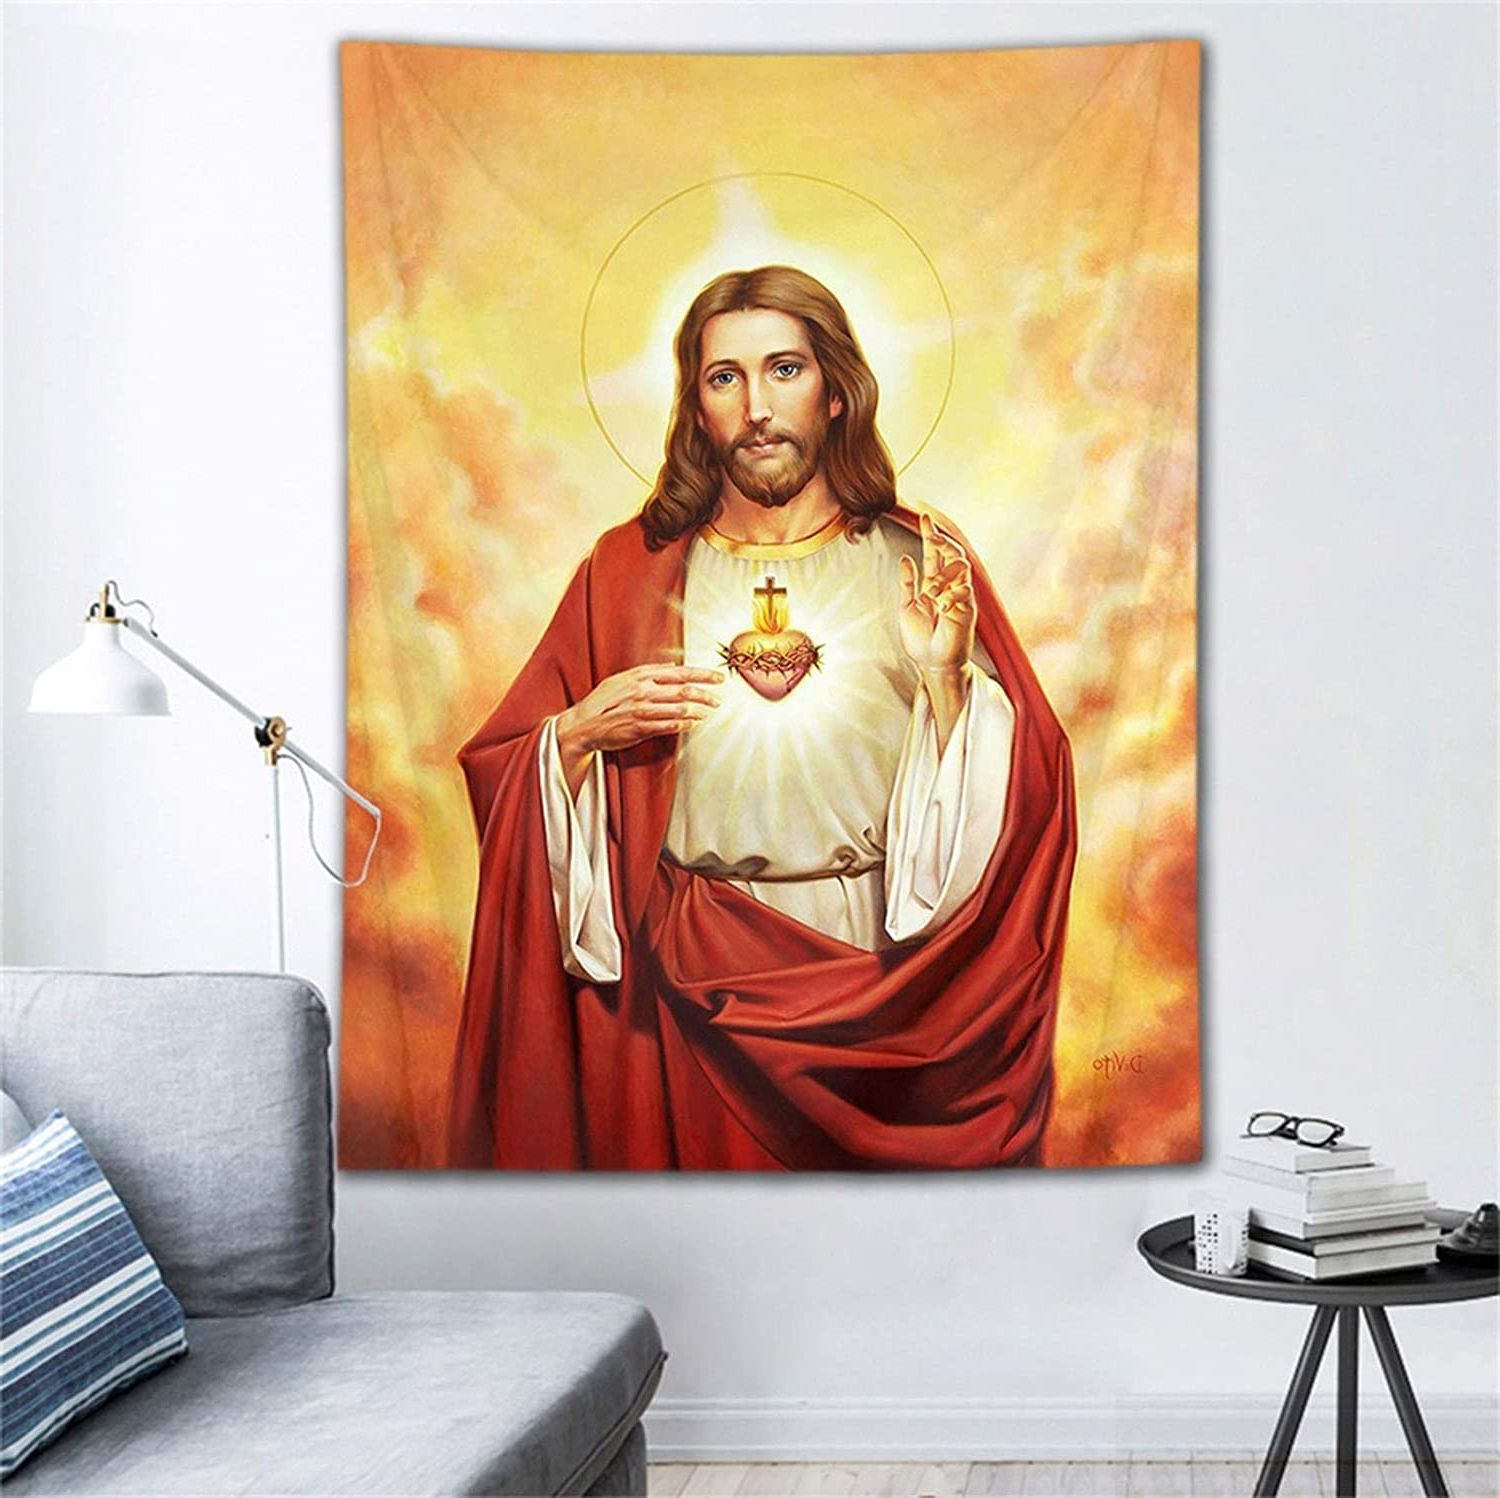 Lb Jesus Tapestry Jesus Christ In Heaven Tapestry Wall Hanging Religion  Christian Wall Tapestry Art Poster Decoration For Living Room Bedroom  College For Favorite Blended Fabric Trust In The Lord Tapestries And Wall Hangings (View 6 of 20)